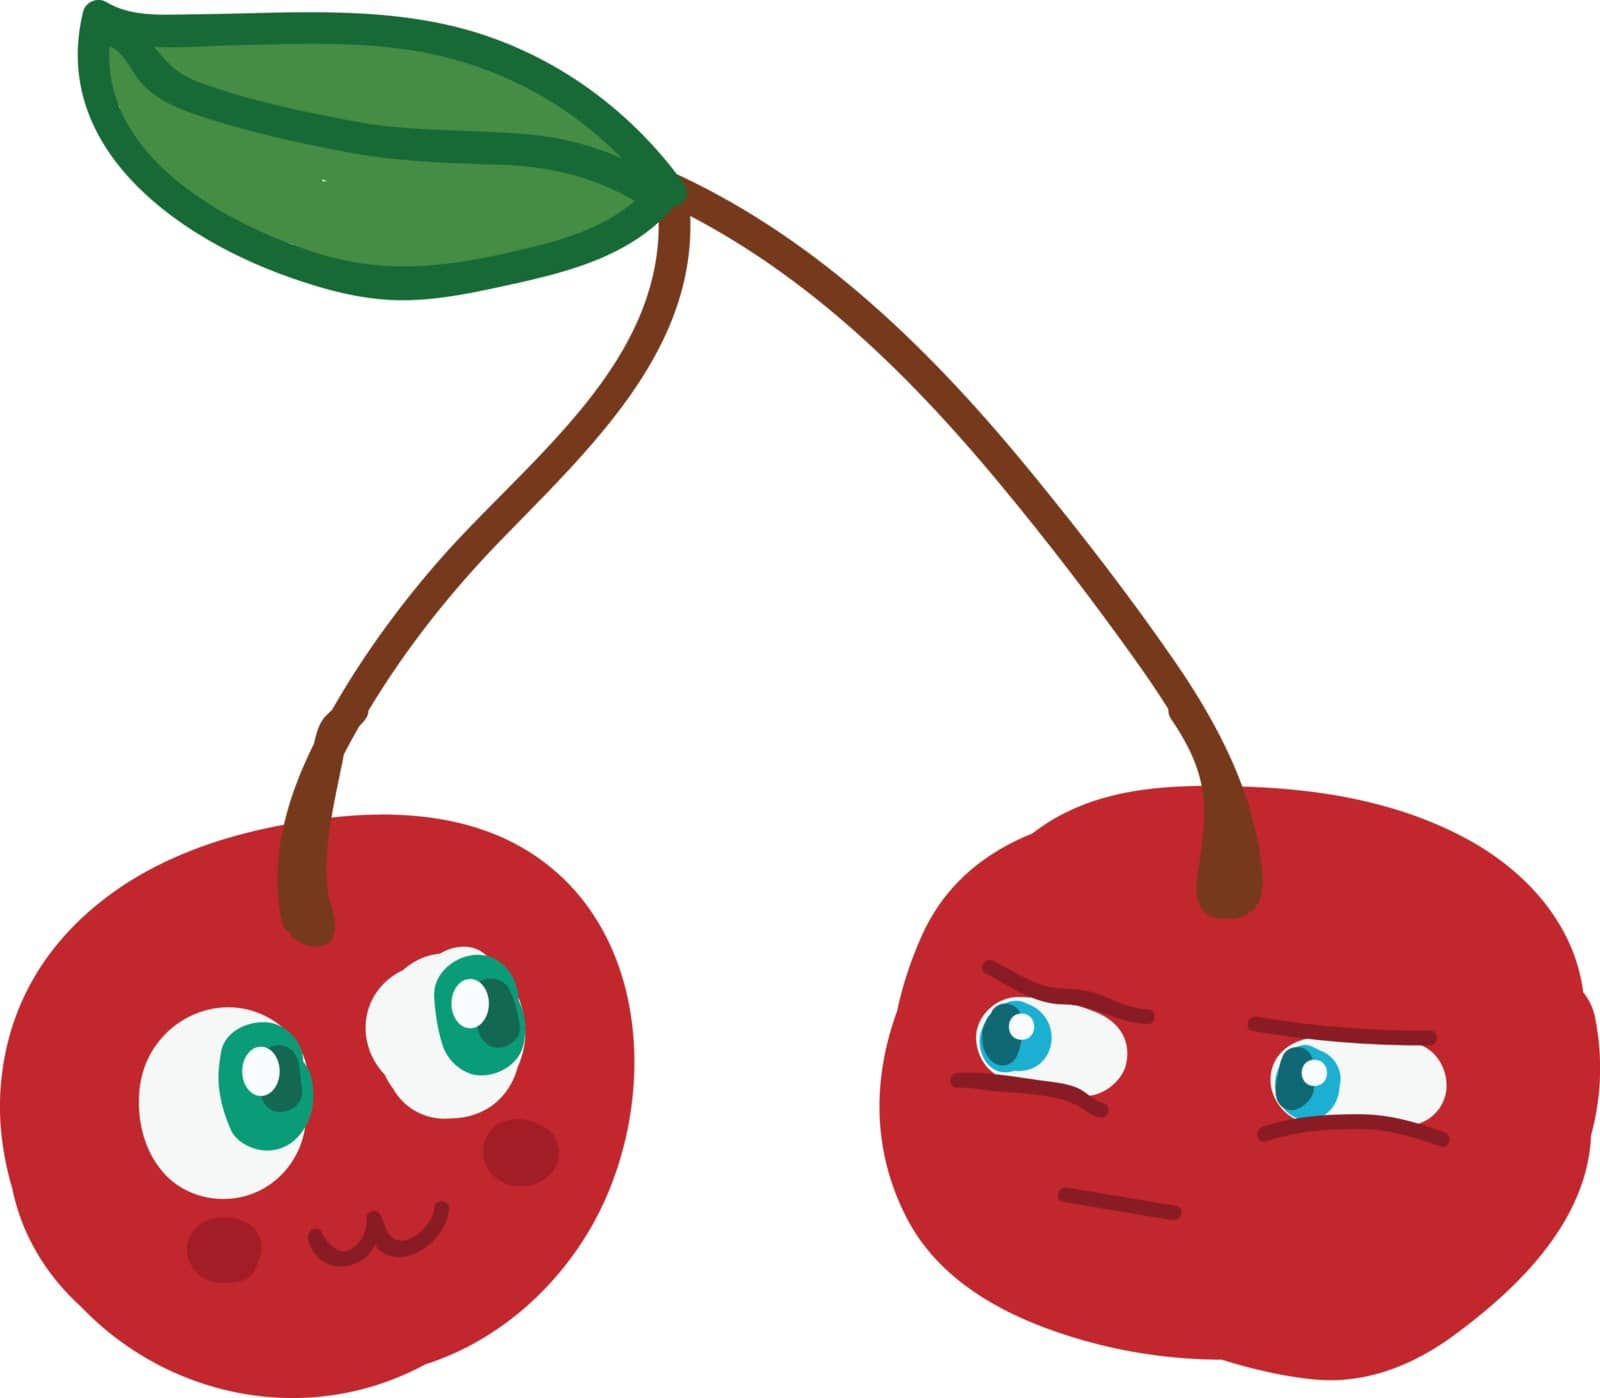 A pair of cherries vector or color illustration by Morphart